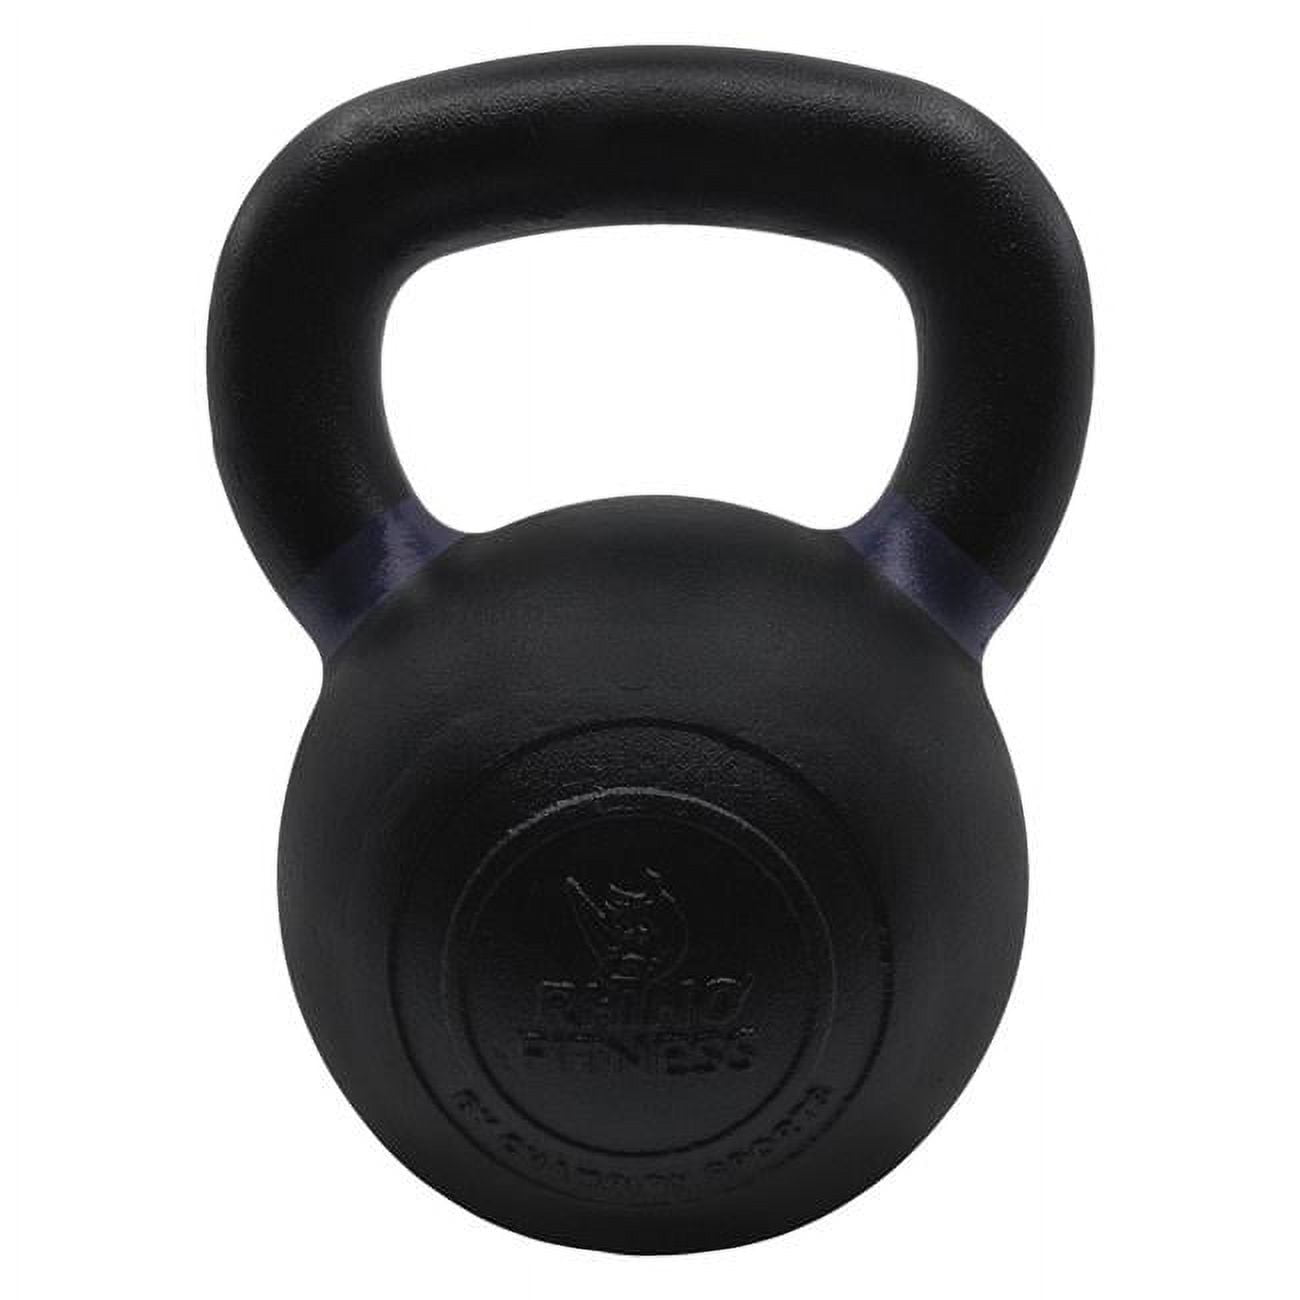 Picture of Champion Sports PCK45 8 x 6 x 10 in. 45 lbs Iron Kettlebell with Purple Handles